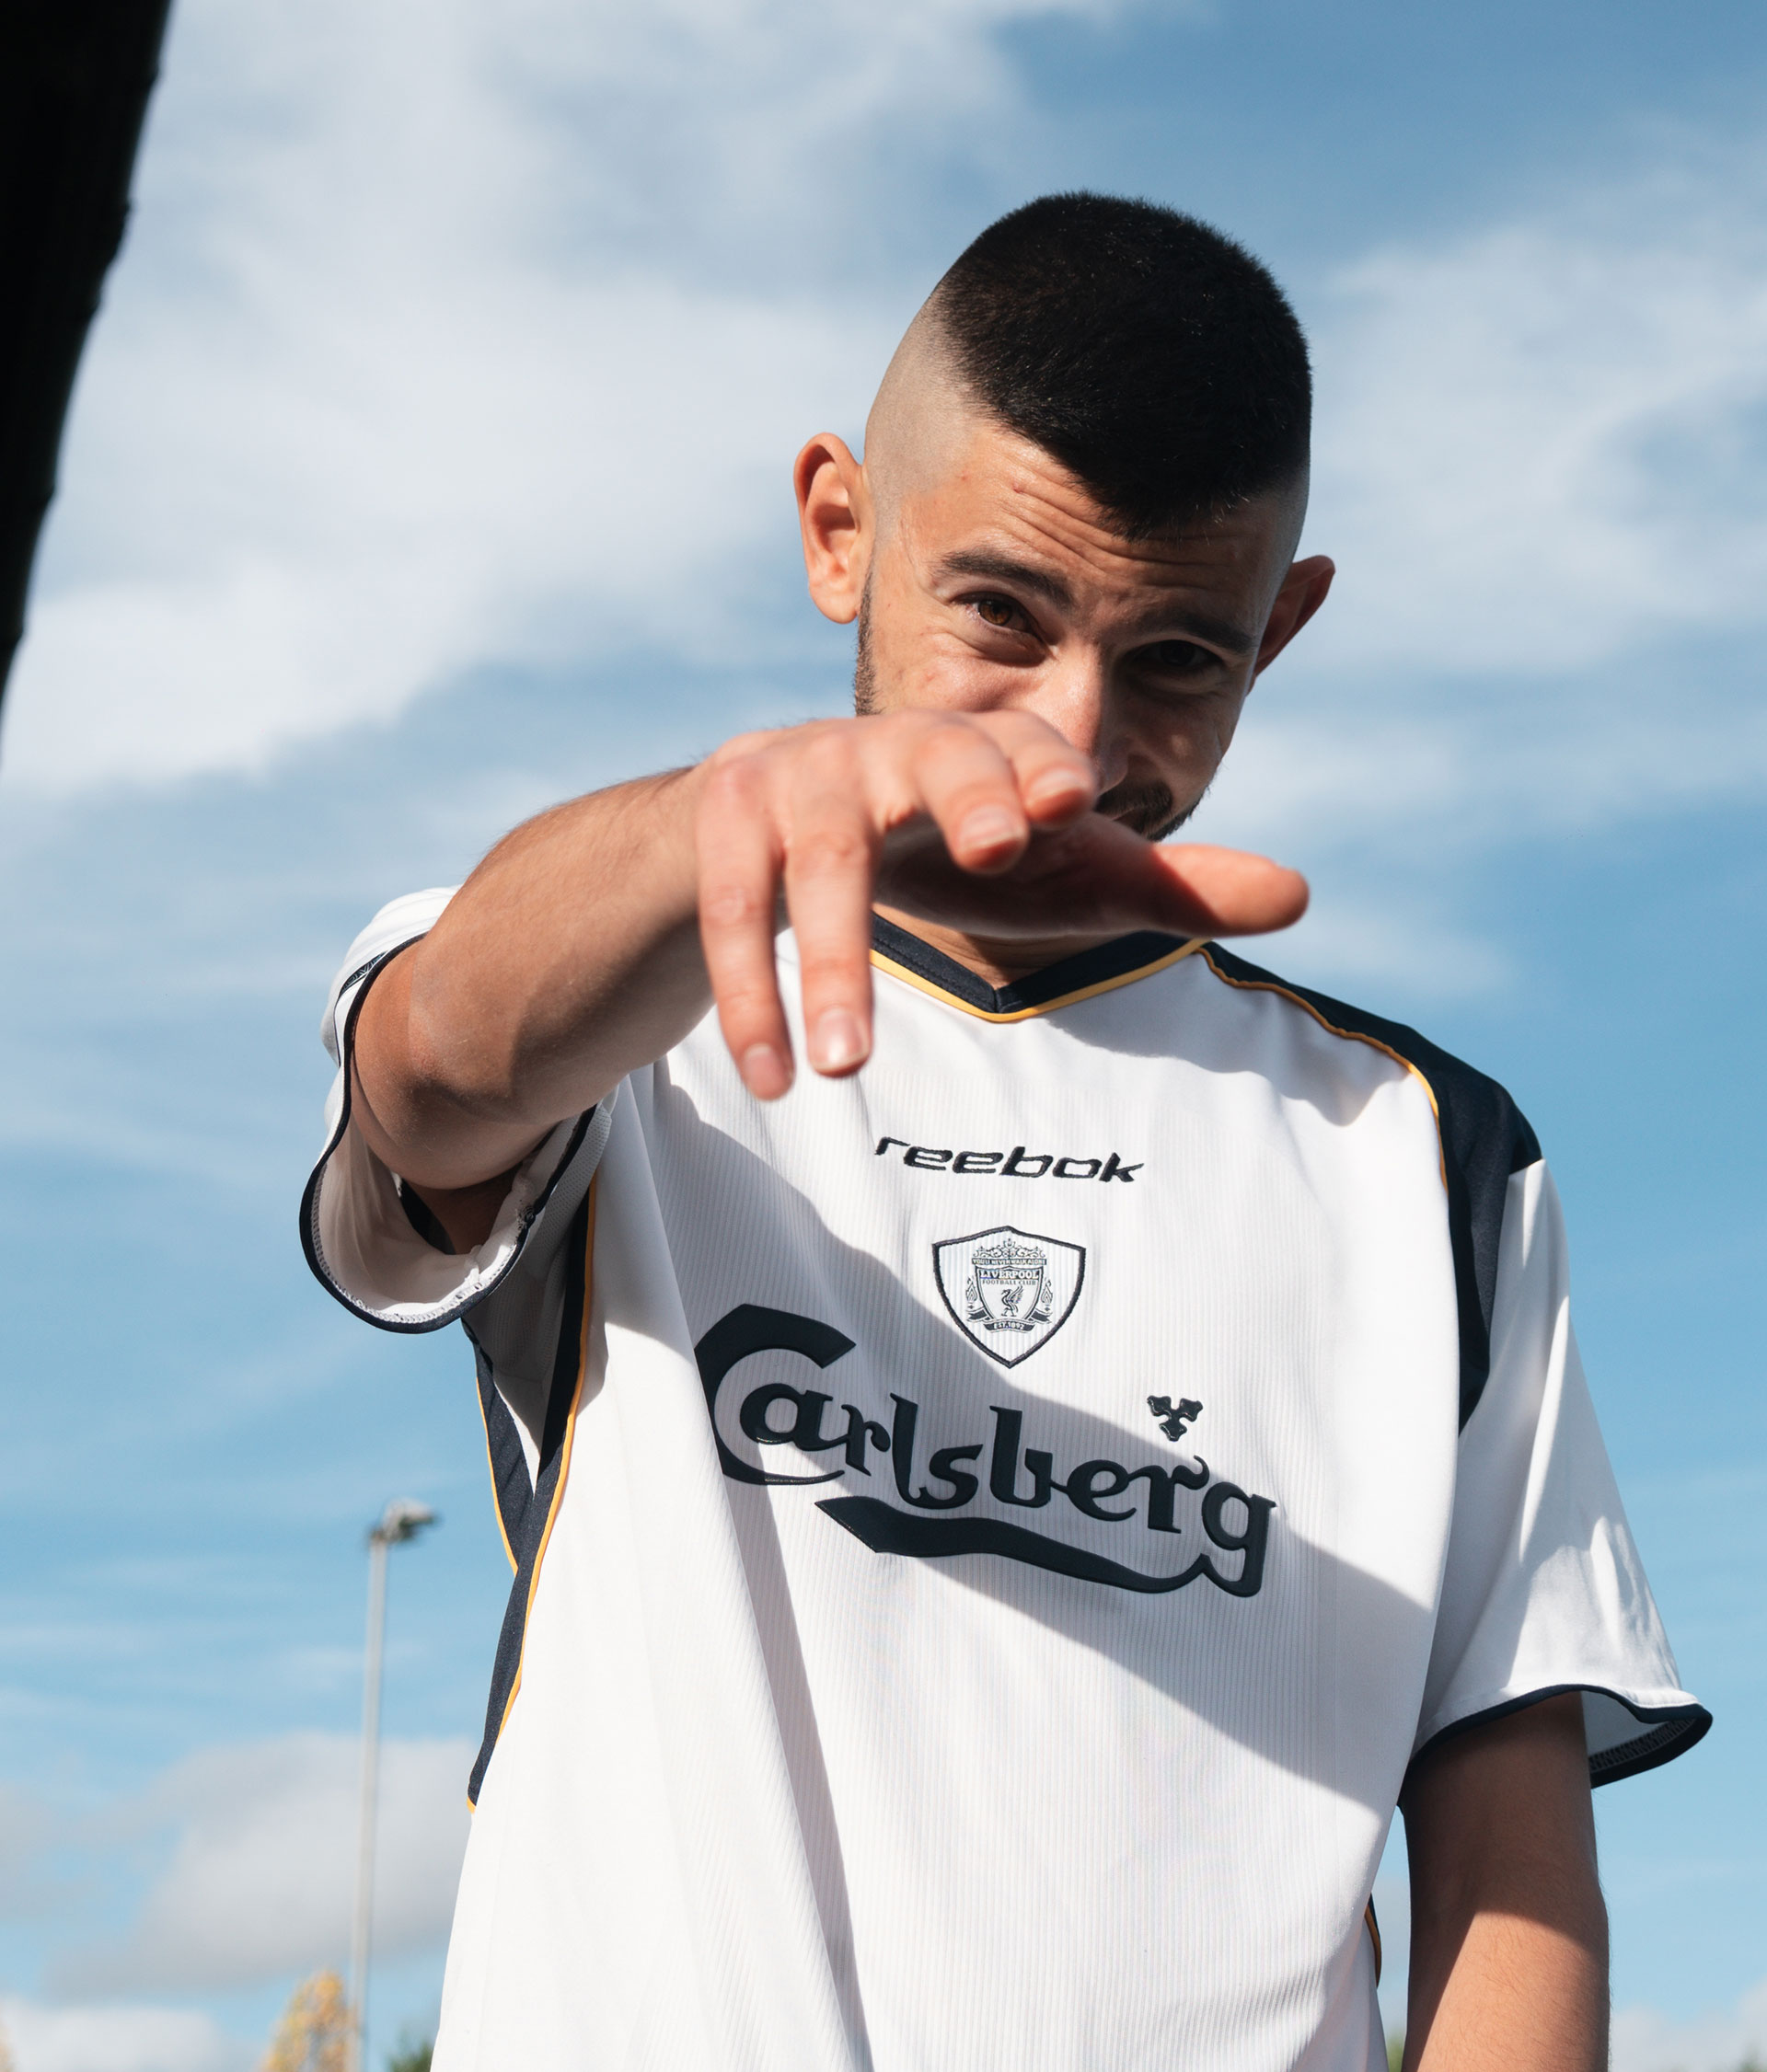 Hamid wearing a white football jersey for Carlsberg.